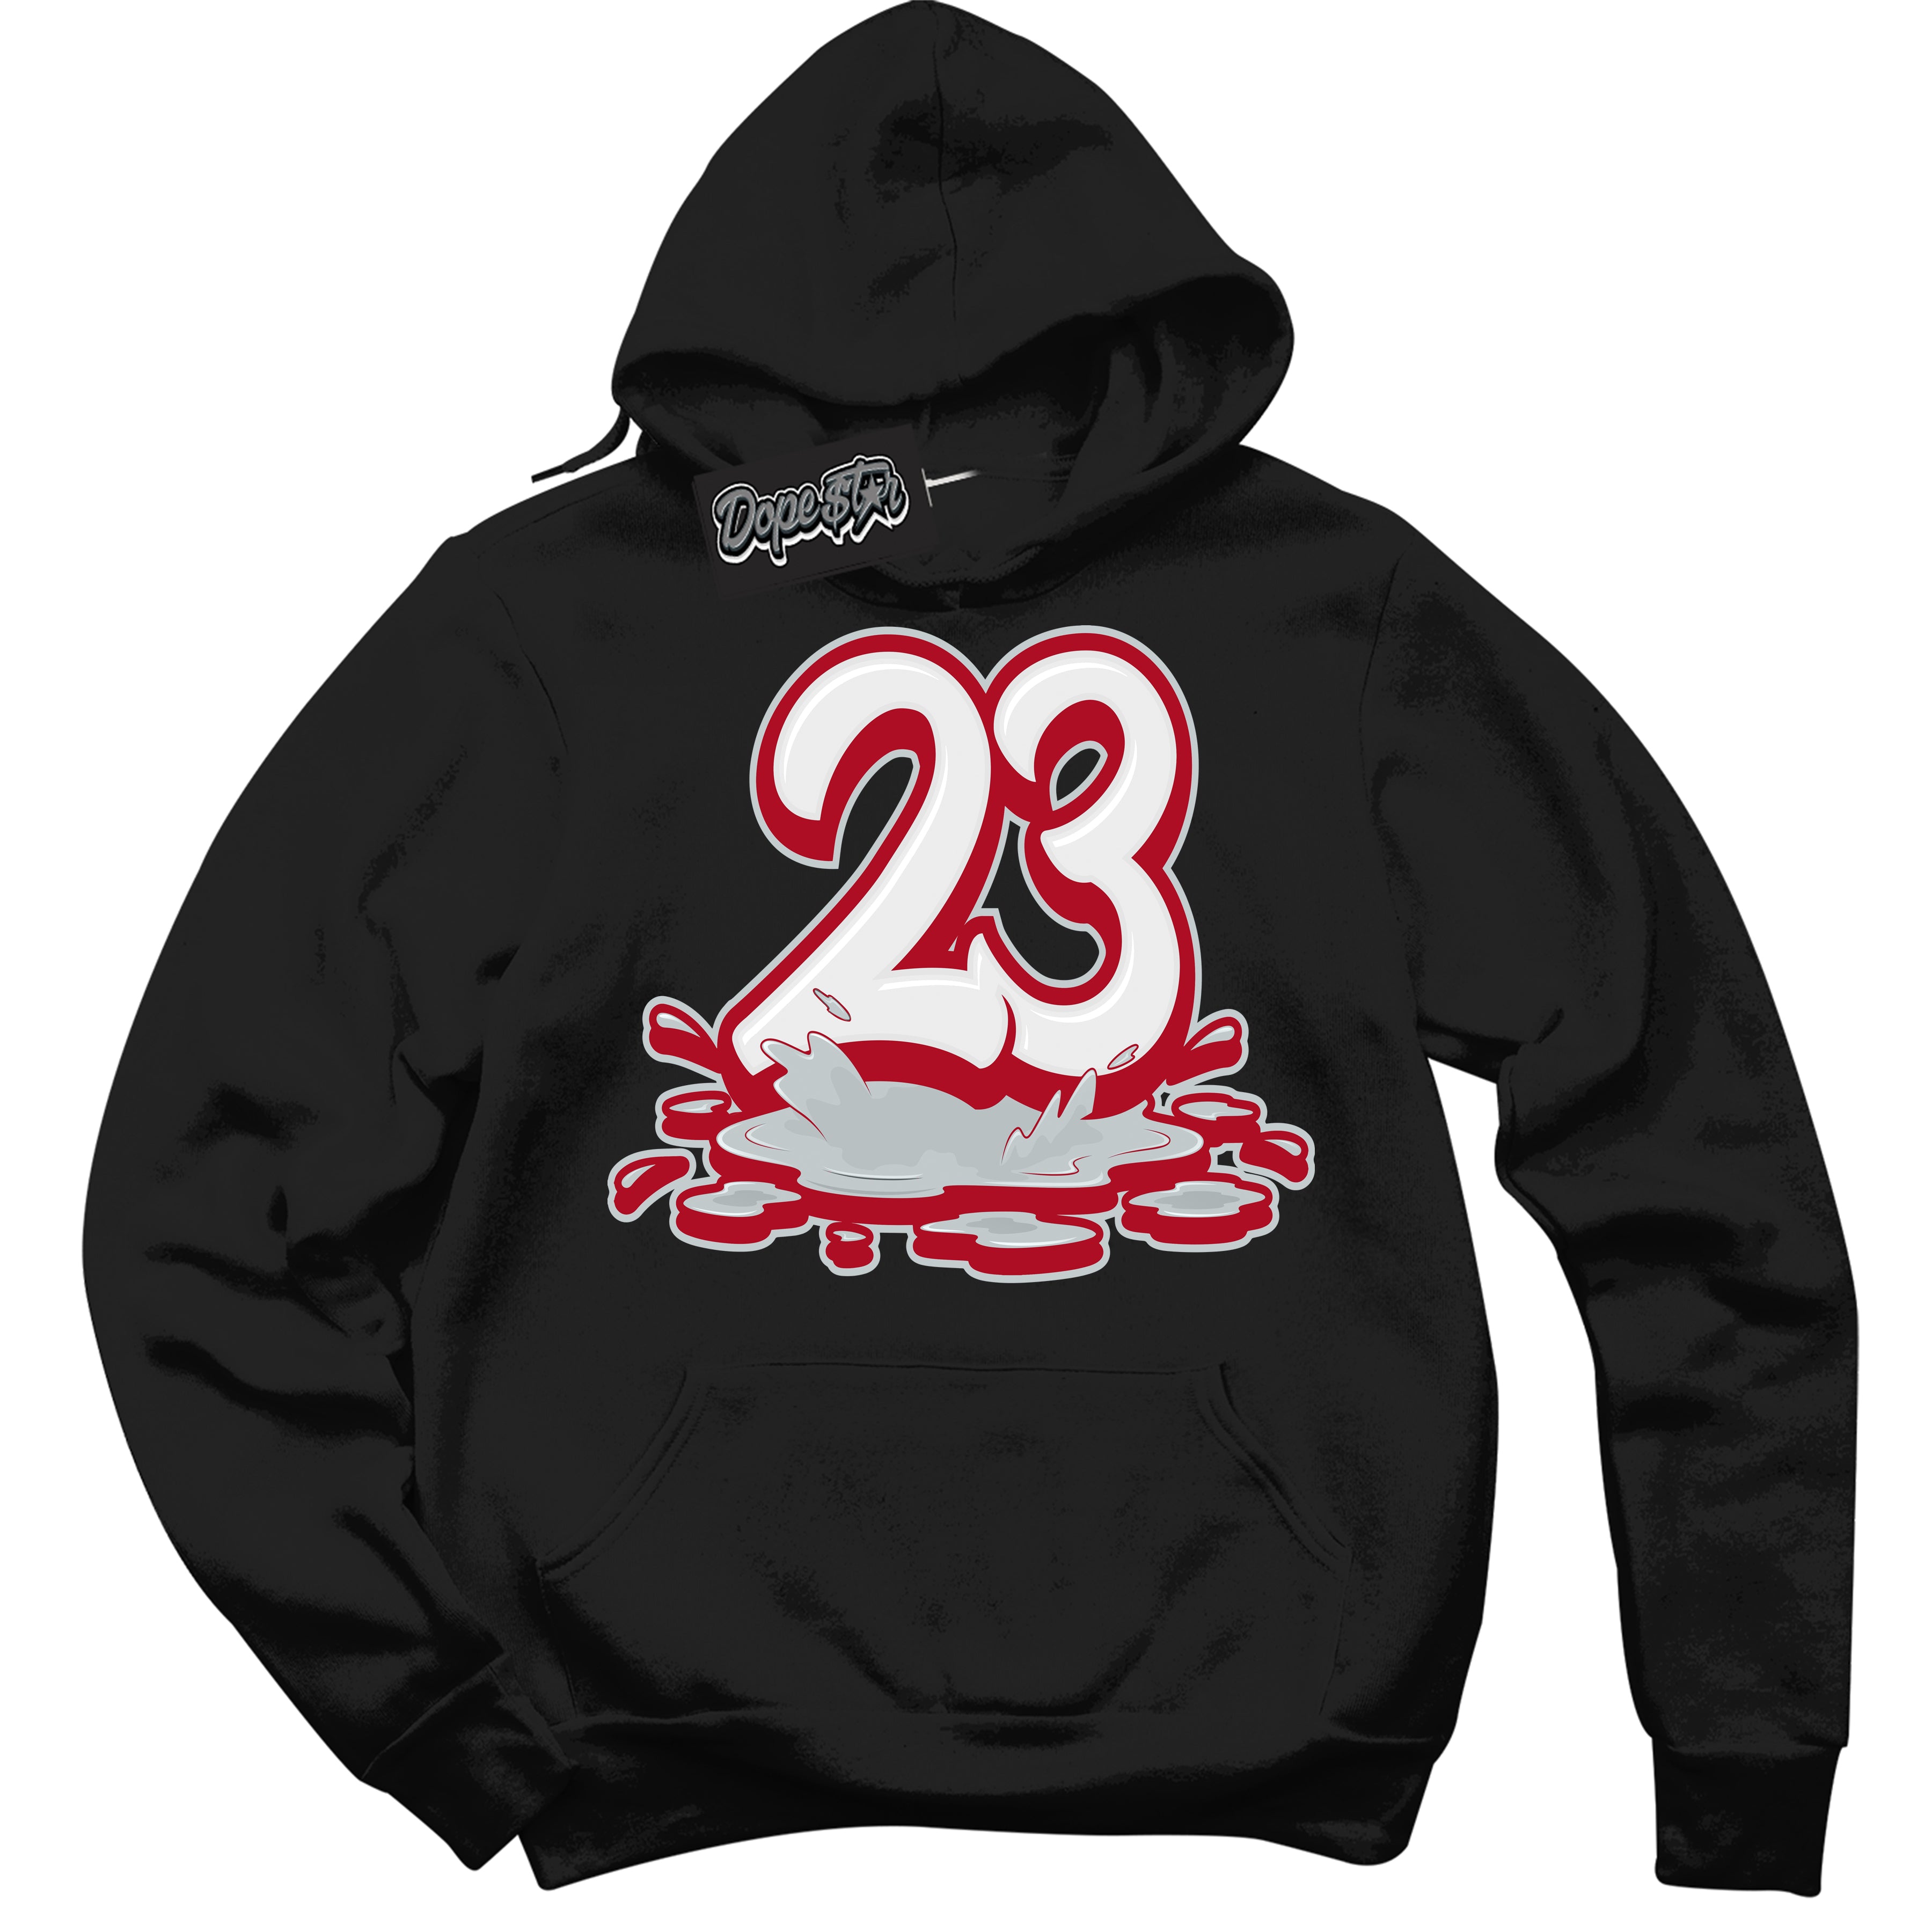 Cool Black Hoodie with “ 23 Melting ”  design that Perfectly Matches  Reverse Ultraman Sneakers.